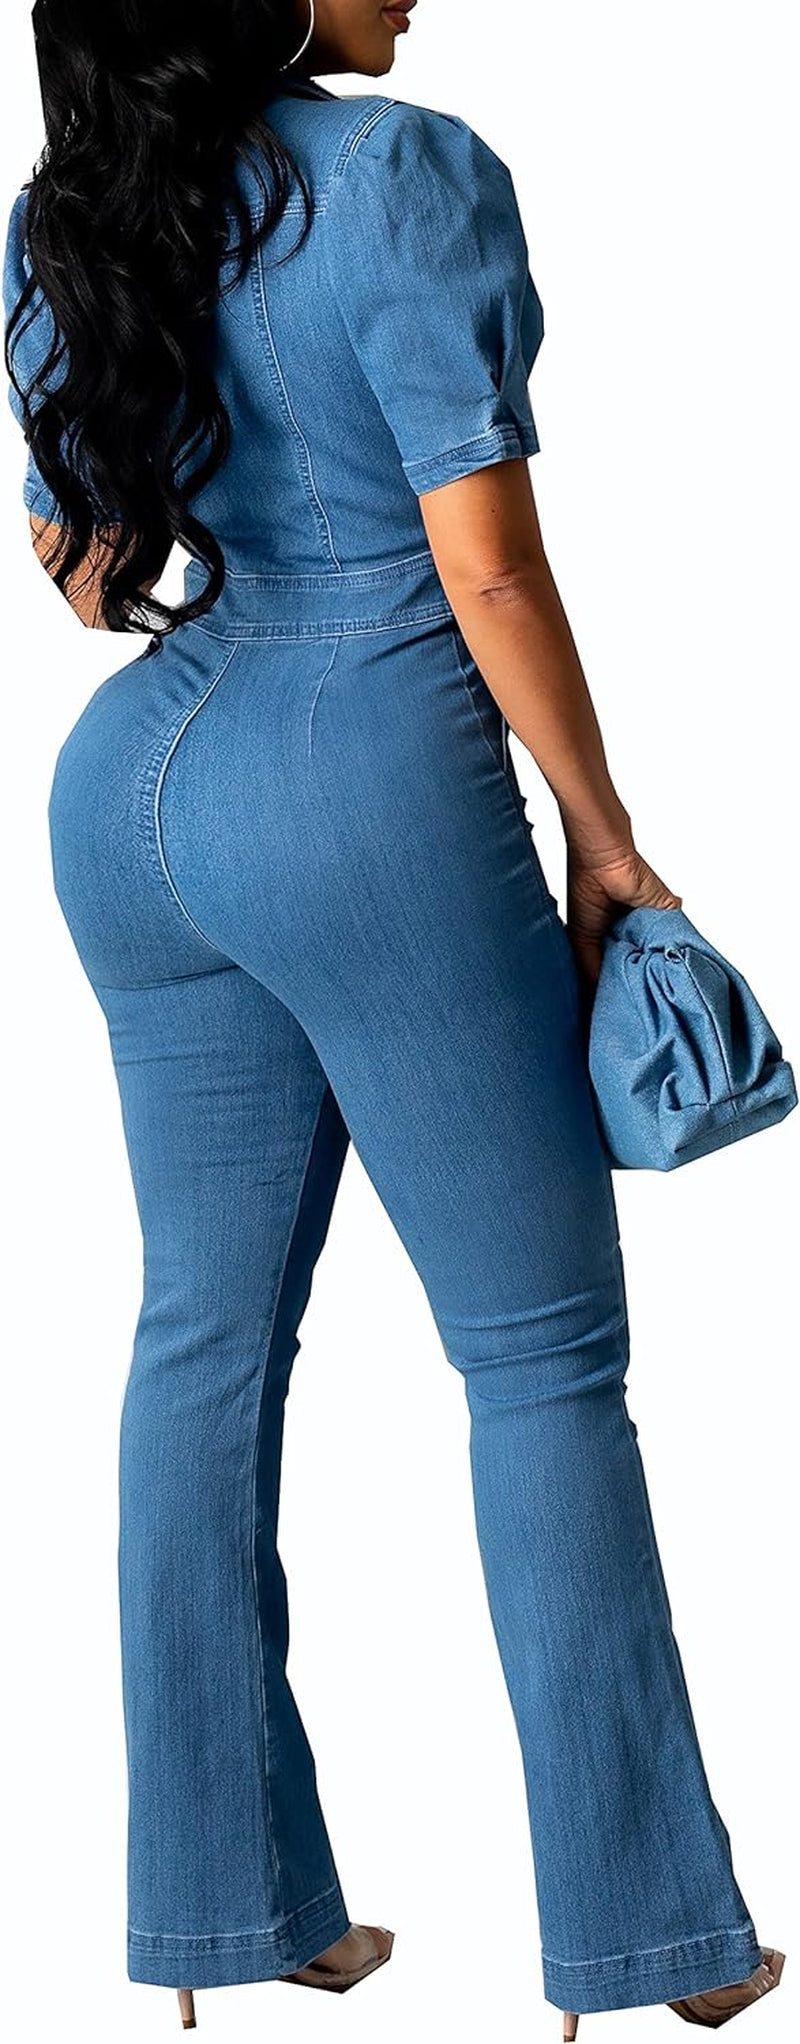 Sexy Jean Jumpsuit for Women Casual Short Sleeve Bell Bottom Denim Pants Jumpsuits with Zipper Pockets